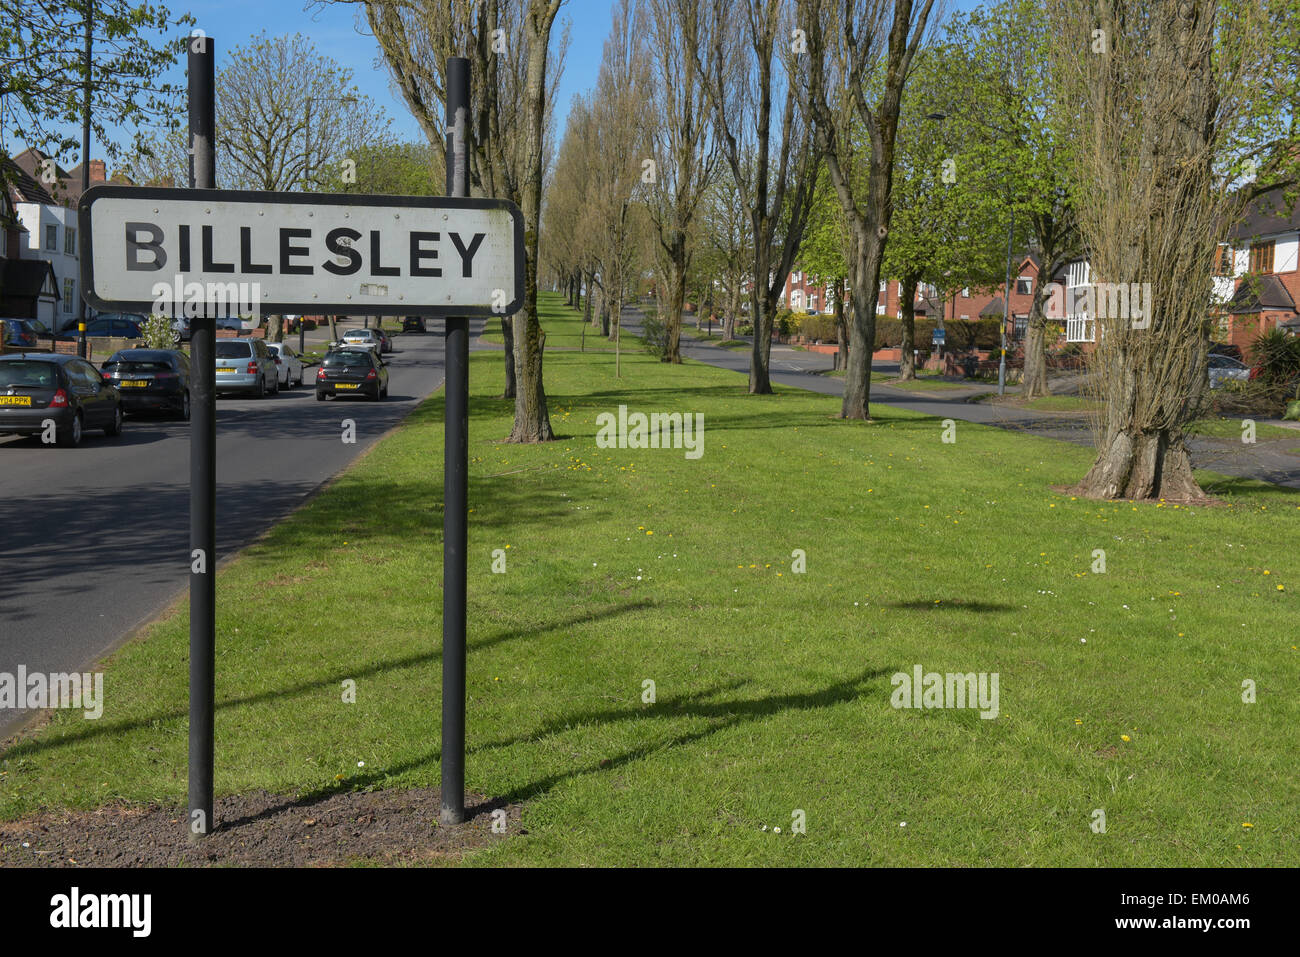 Birmingham, UK. 15th Apr, 2015. A 25-year-old man from Yardley Wood in Birmingham has been arrested at a property in the Billesley area of Birmingham on suspicion of preparing for terrorist acts in Syria. Credit:  Michael Scott/Alamy Live News Stock Photo